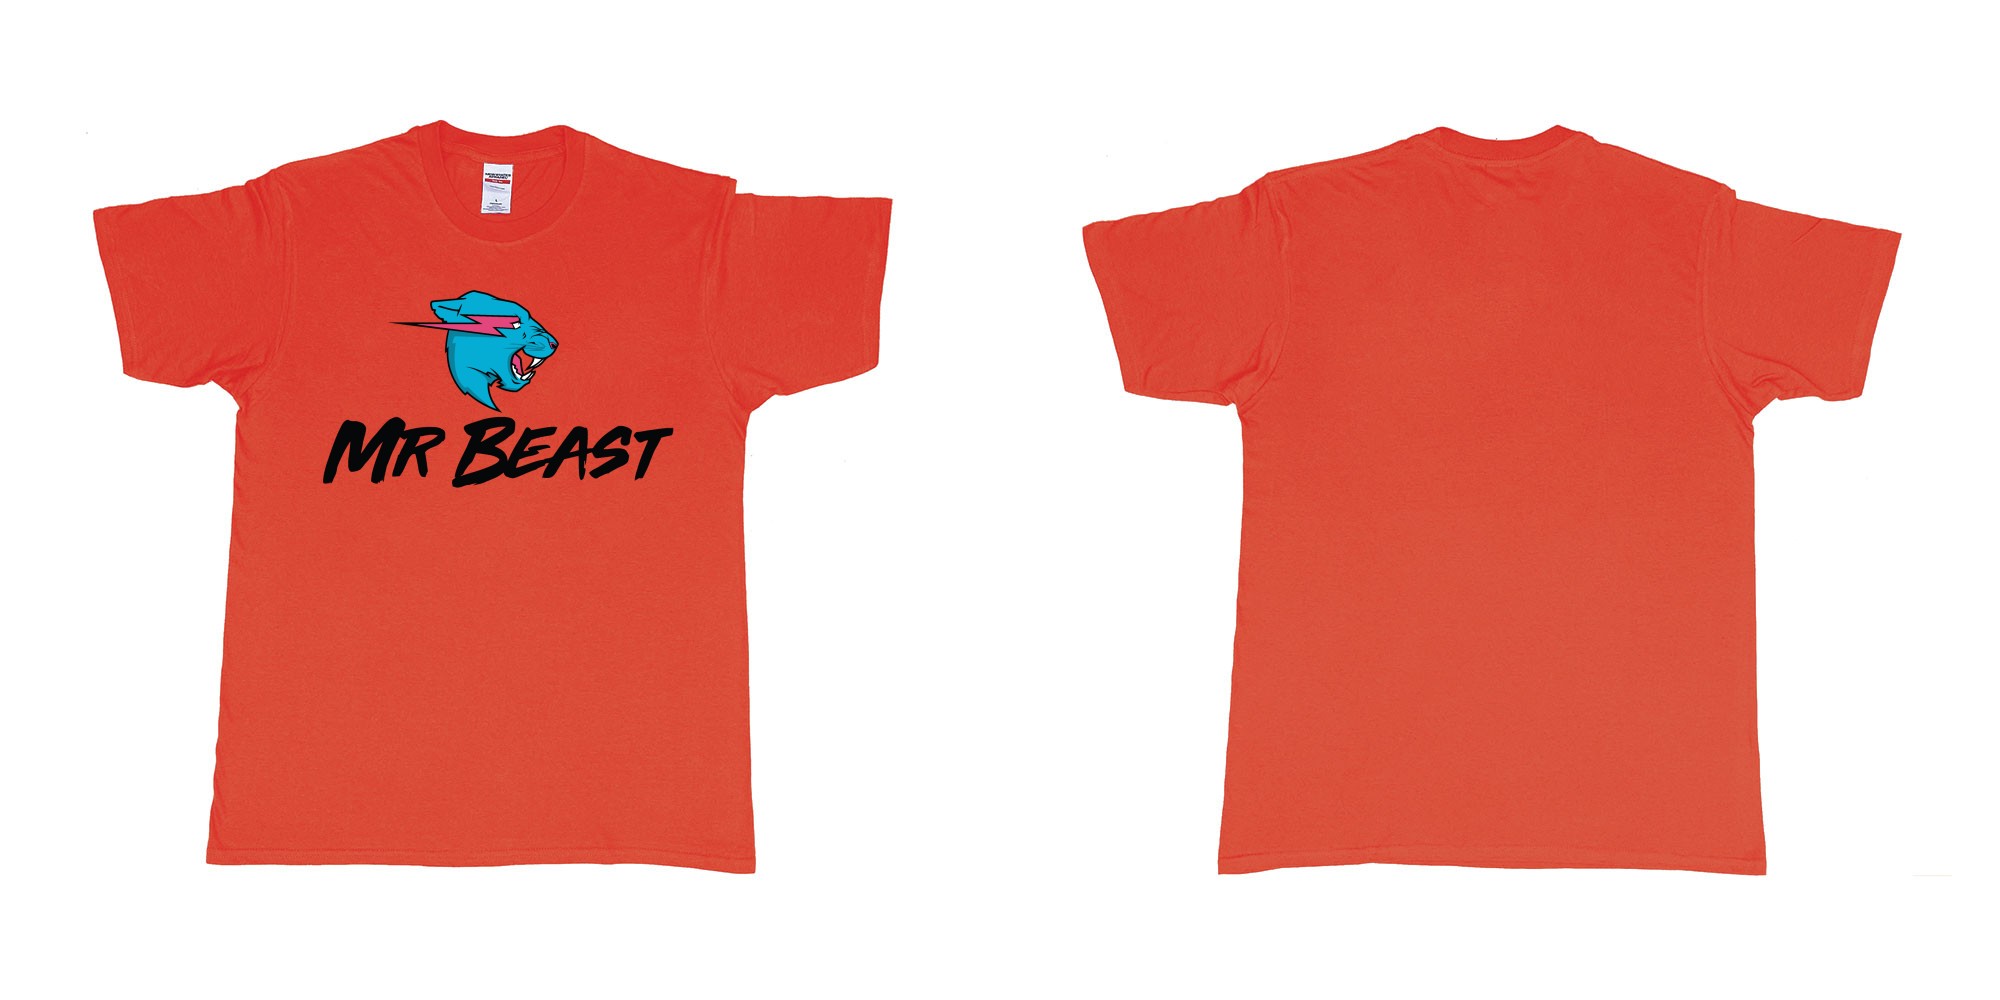 Custom tshirt design mr beast logo in fabric color red choice your own text made in Bali by The Pirate Way